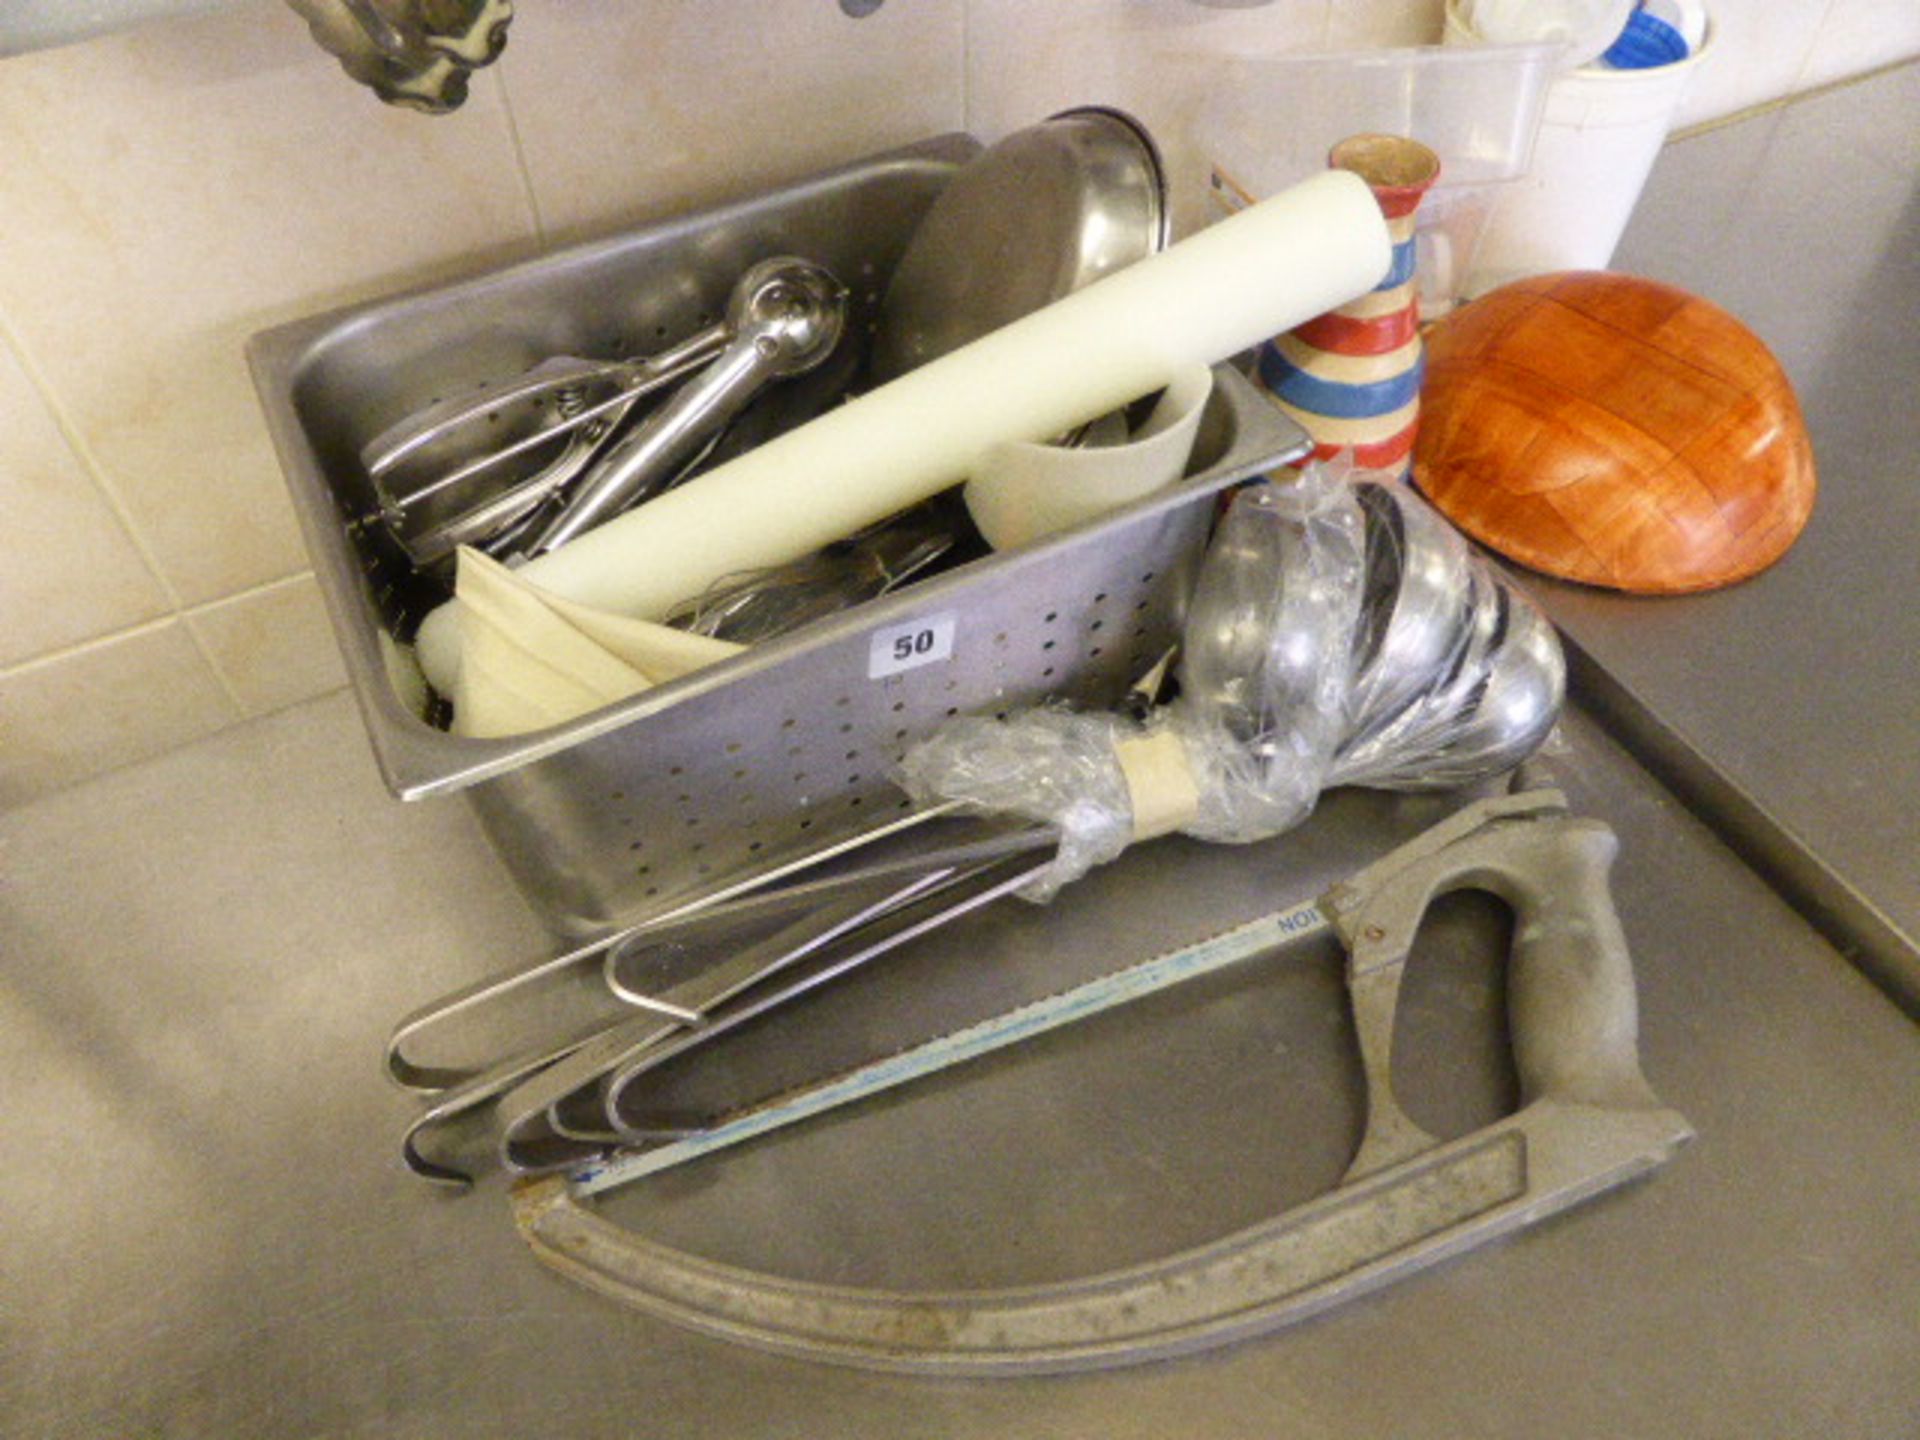 Range of utensils in dish wash area including serving tongs, whisks, pasta spoons, slotted spoons, - Image 2 of 4